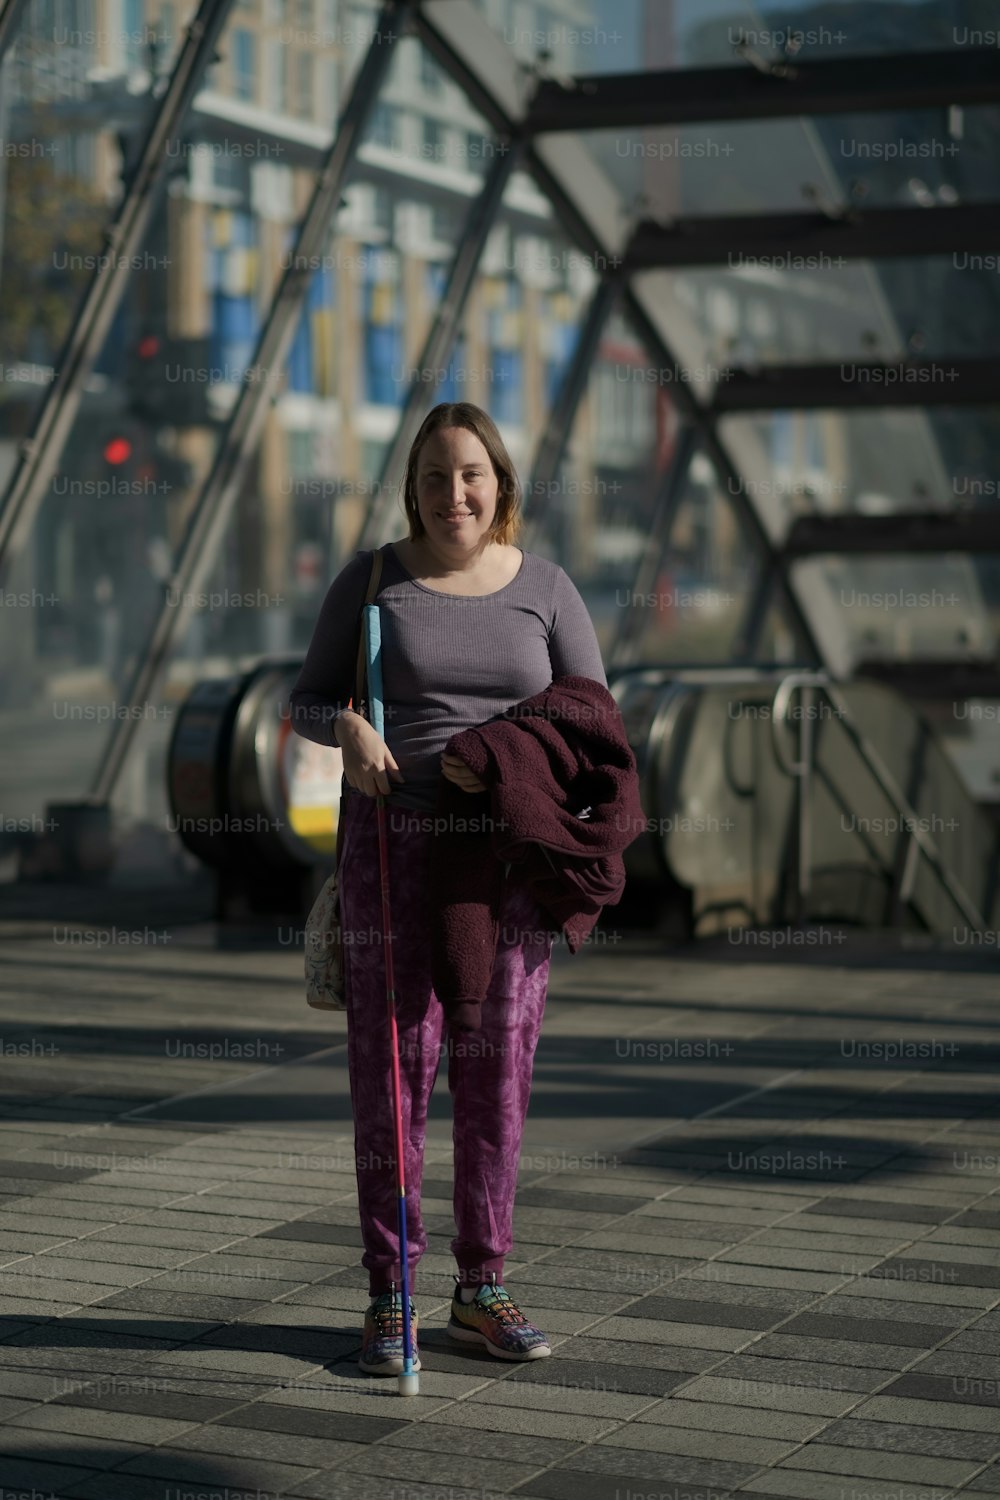 a woman is walking with a purple umbrella